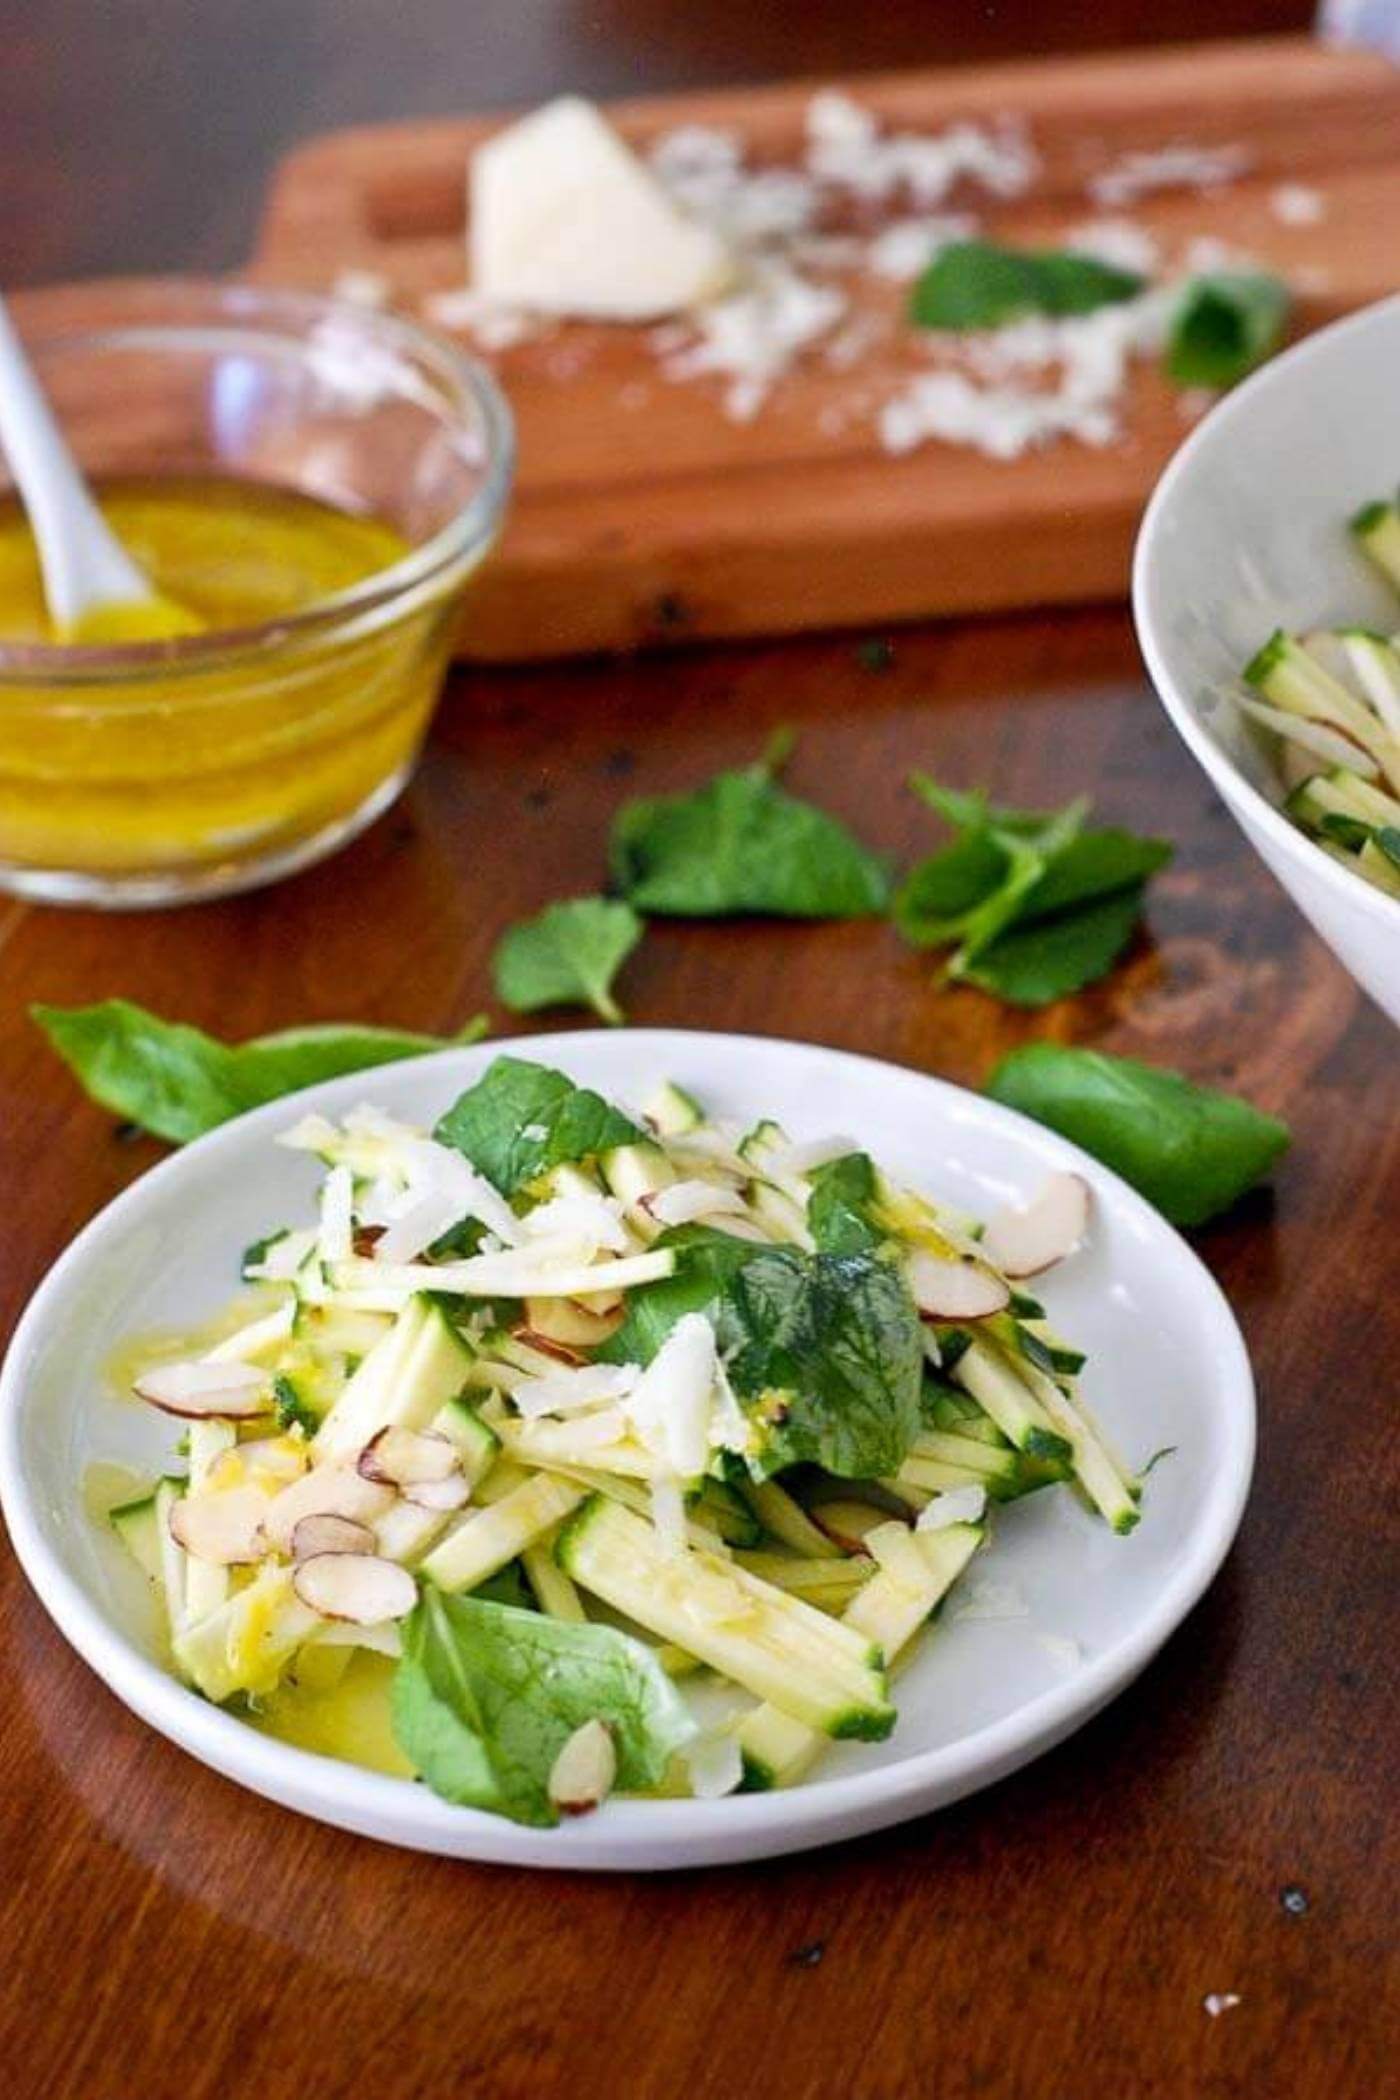 chopped zucchini and herb salad with parmesan.